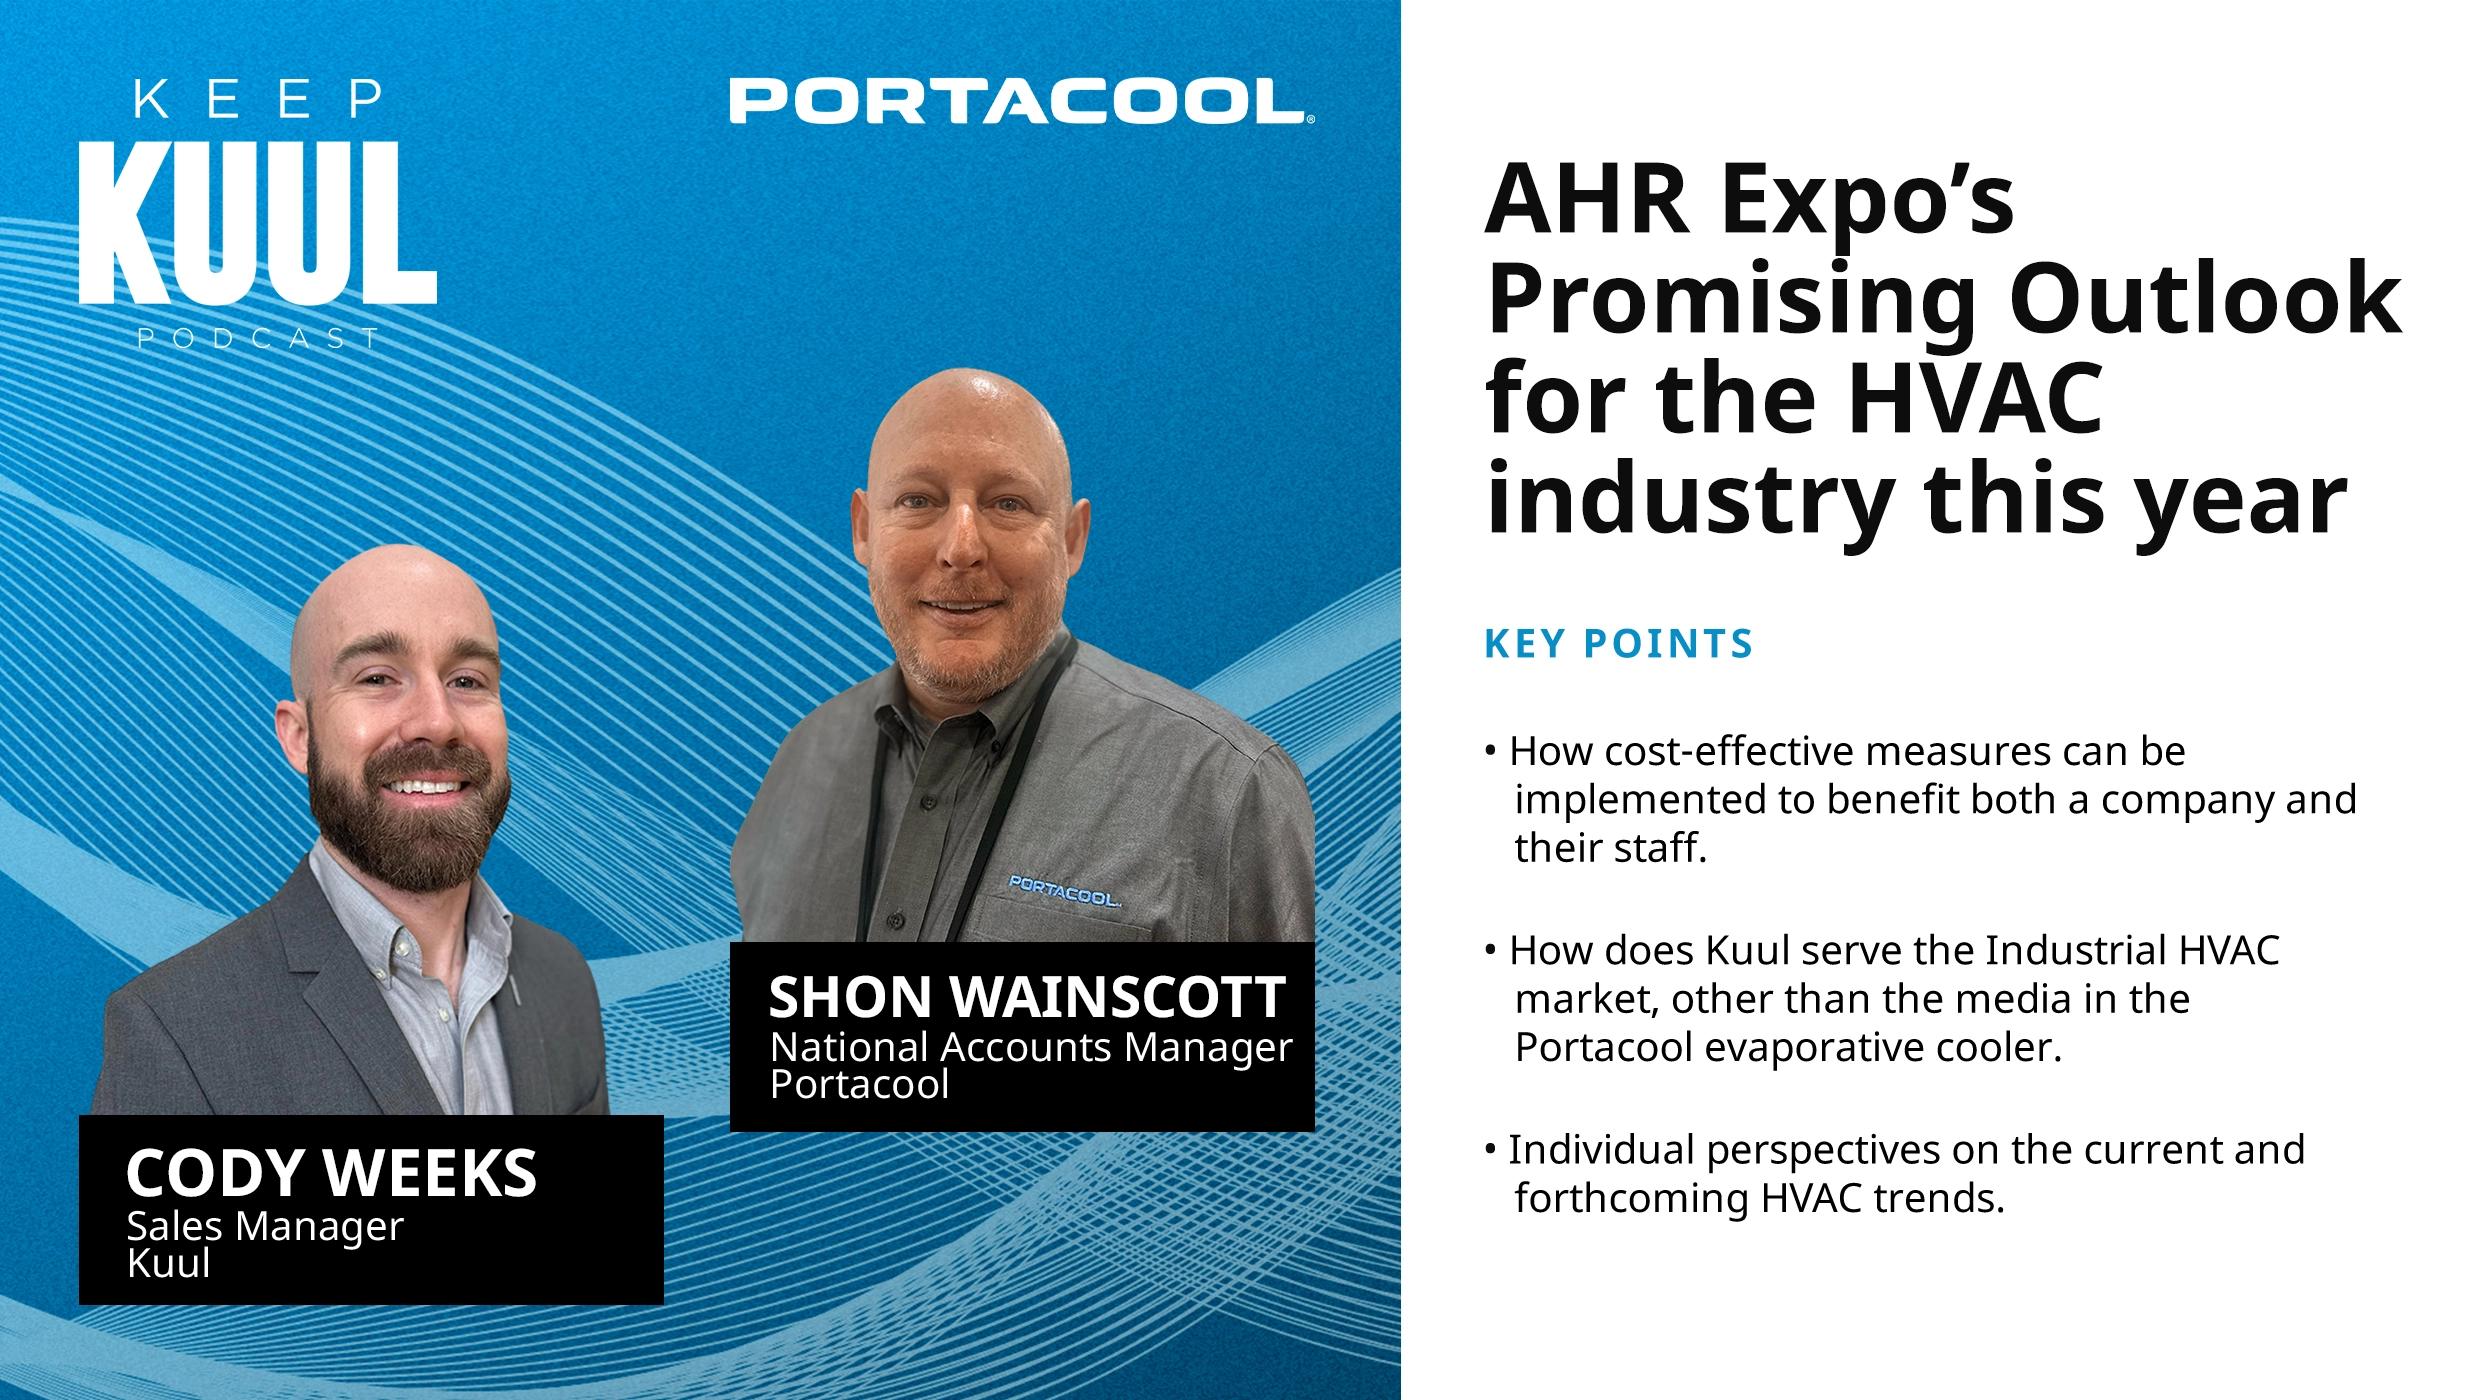 AHR Expo’s Promising Outlook for the HVAC Industry This Year